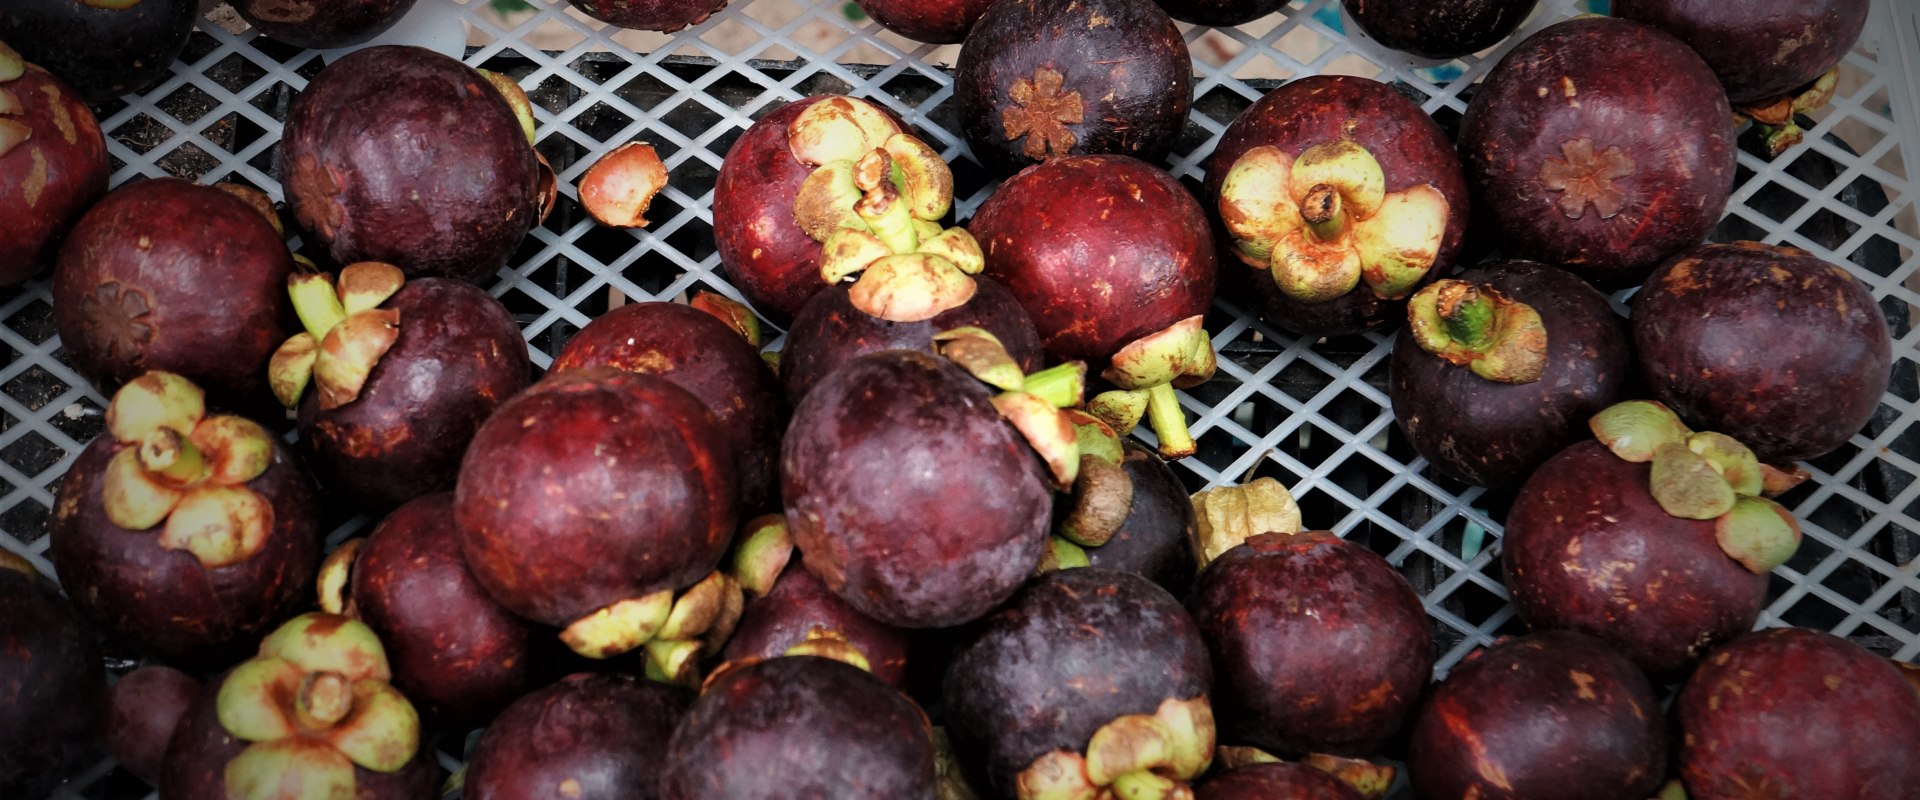 Is mangosteen good for diabetes?